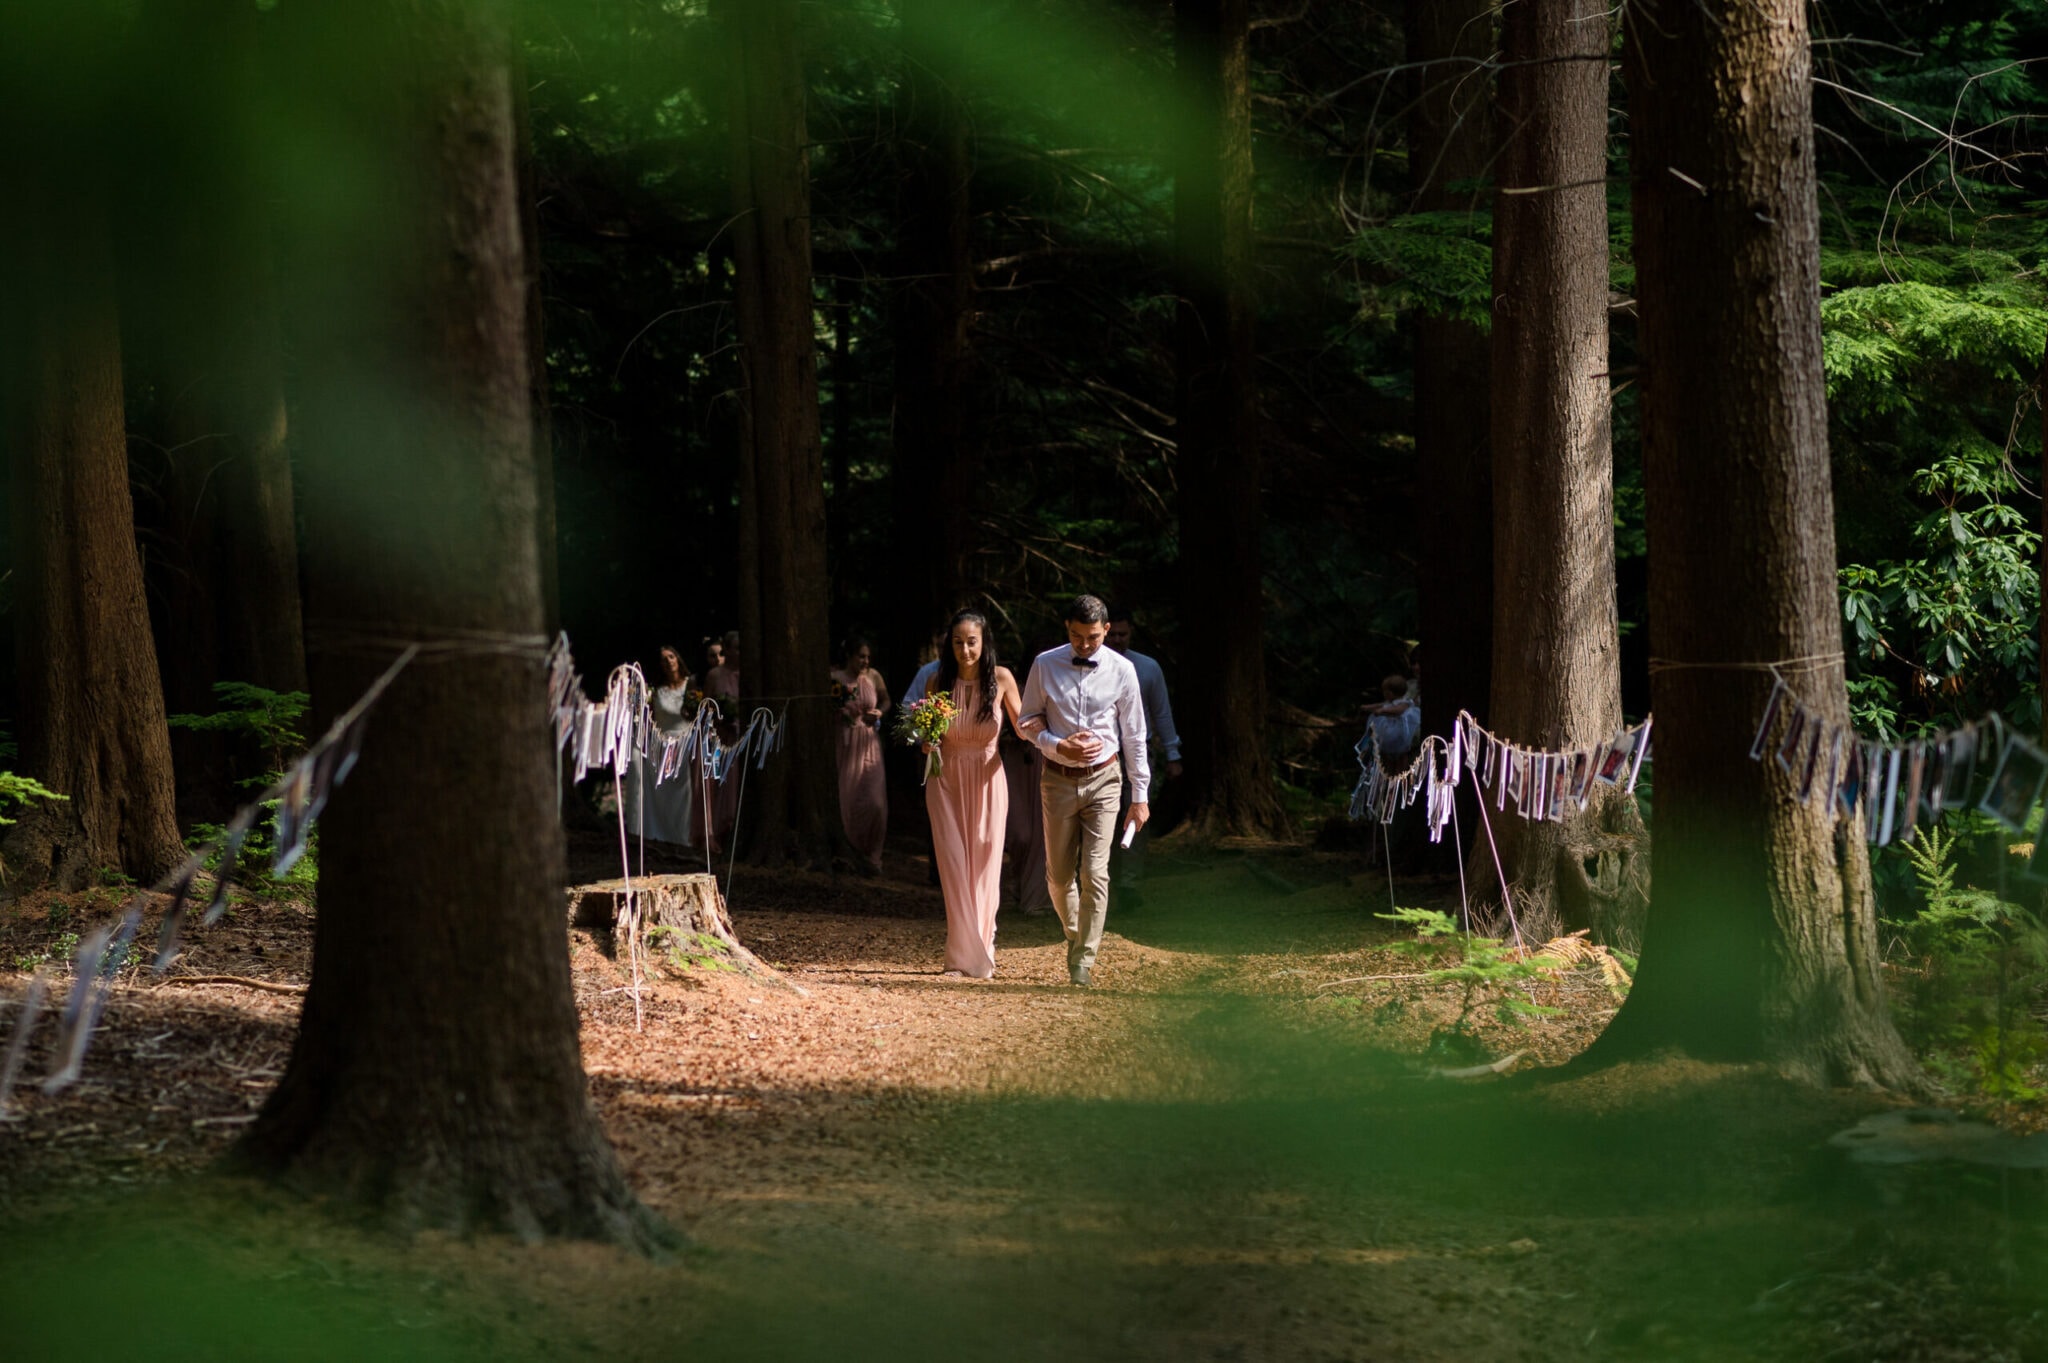 Bridesmaid arriving at Weddings in the Wood in the New Forest